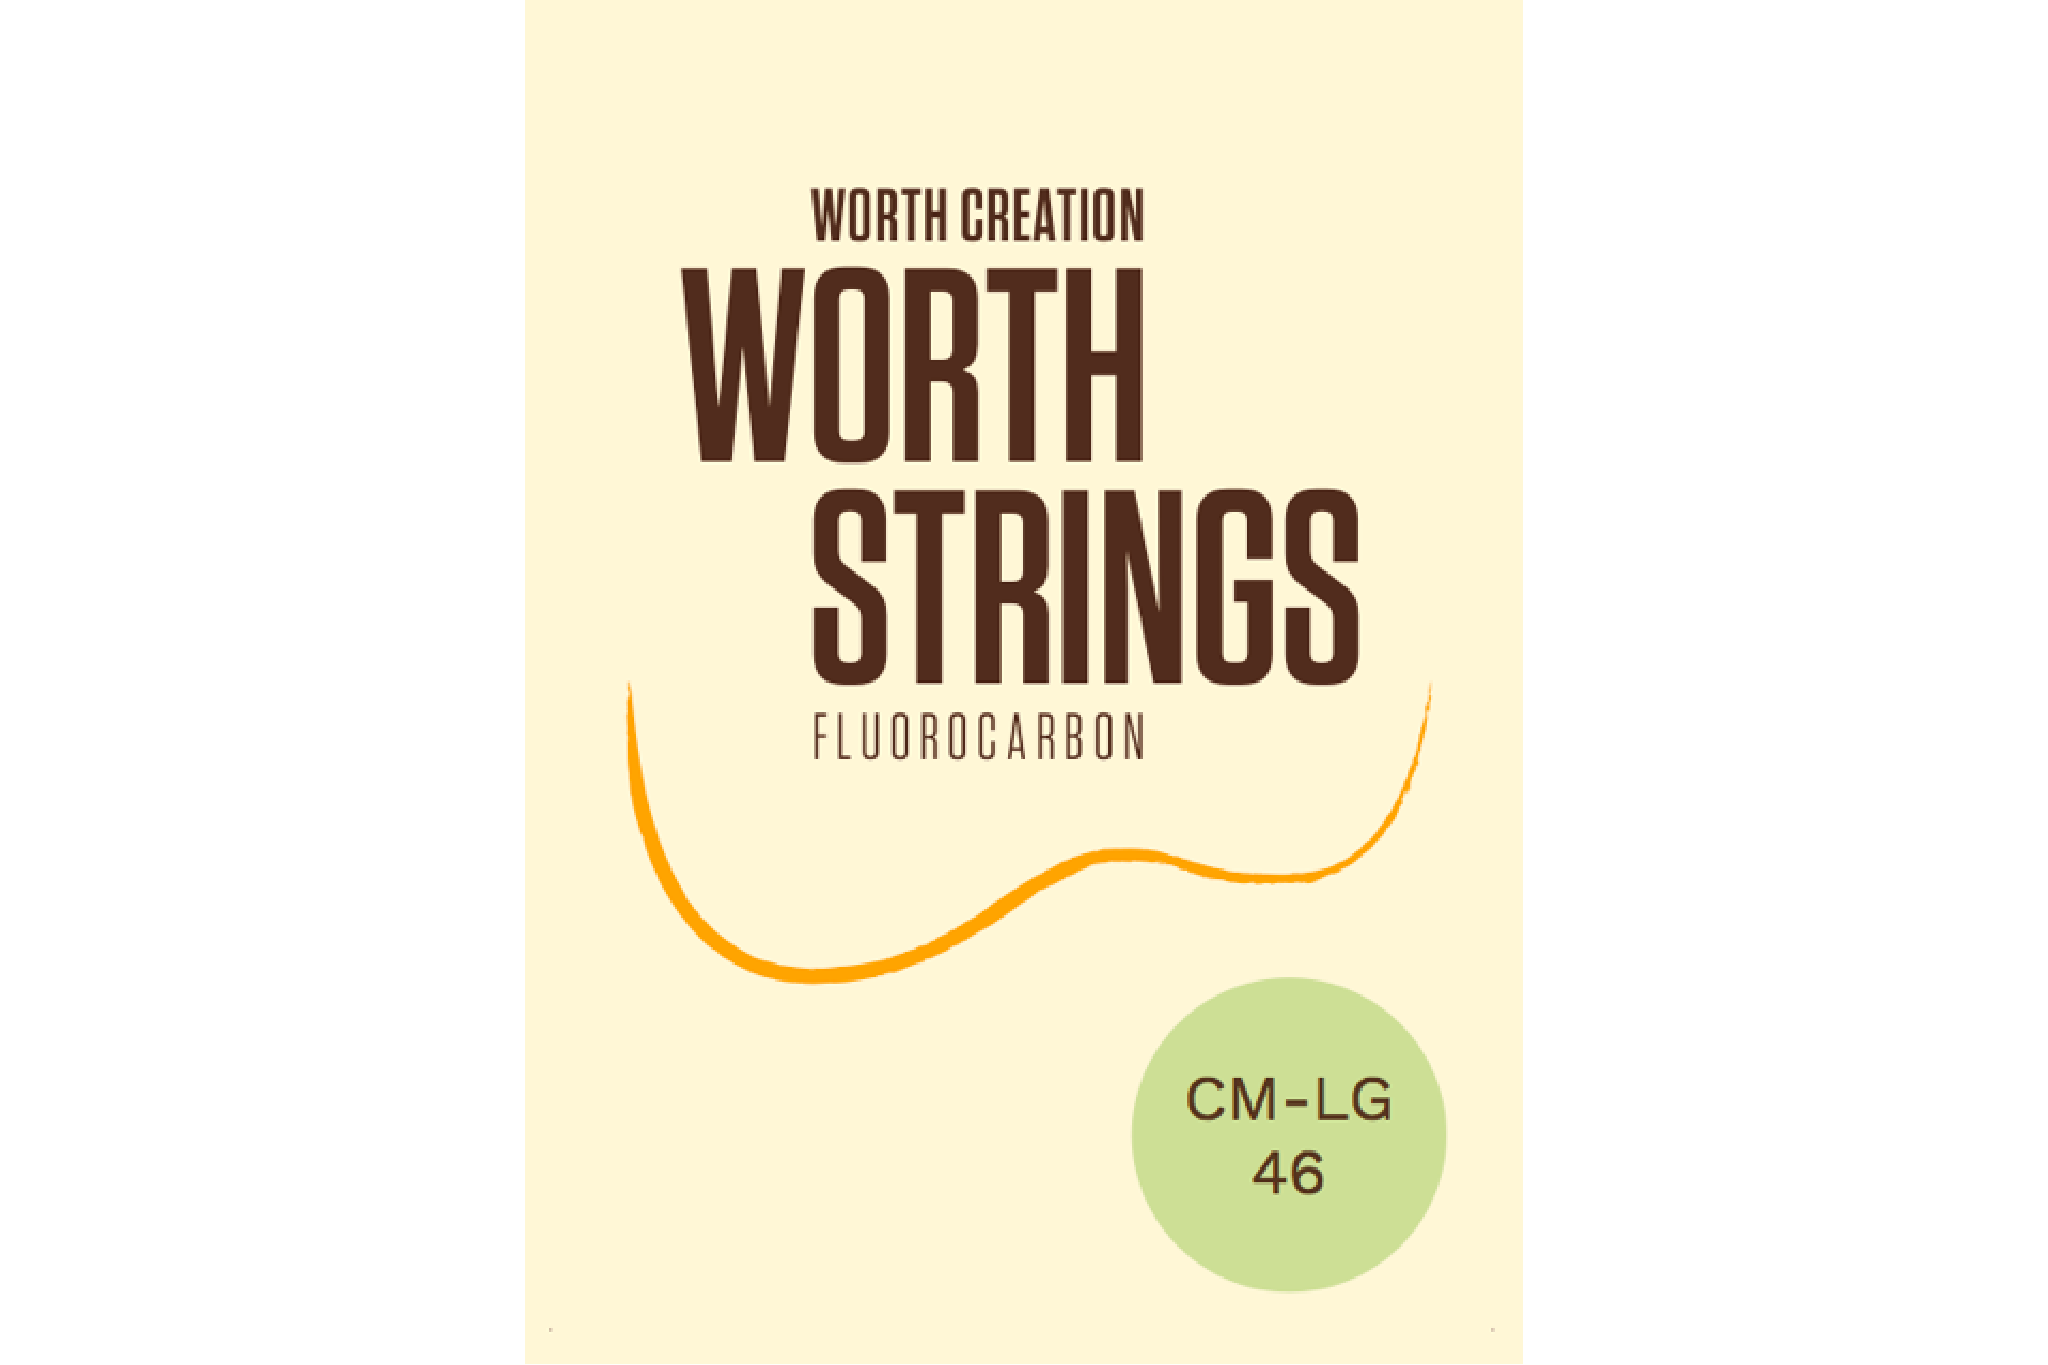 Worth Clear Fluorocarbon Medium Soprano/Concert Low-G Ukulele Strings CM-LG 46 inch (G-C-E-A) Enough For 2 Sets